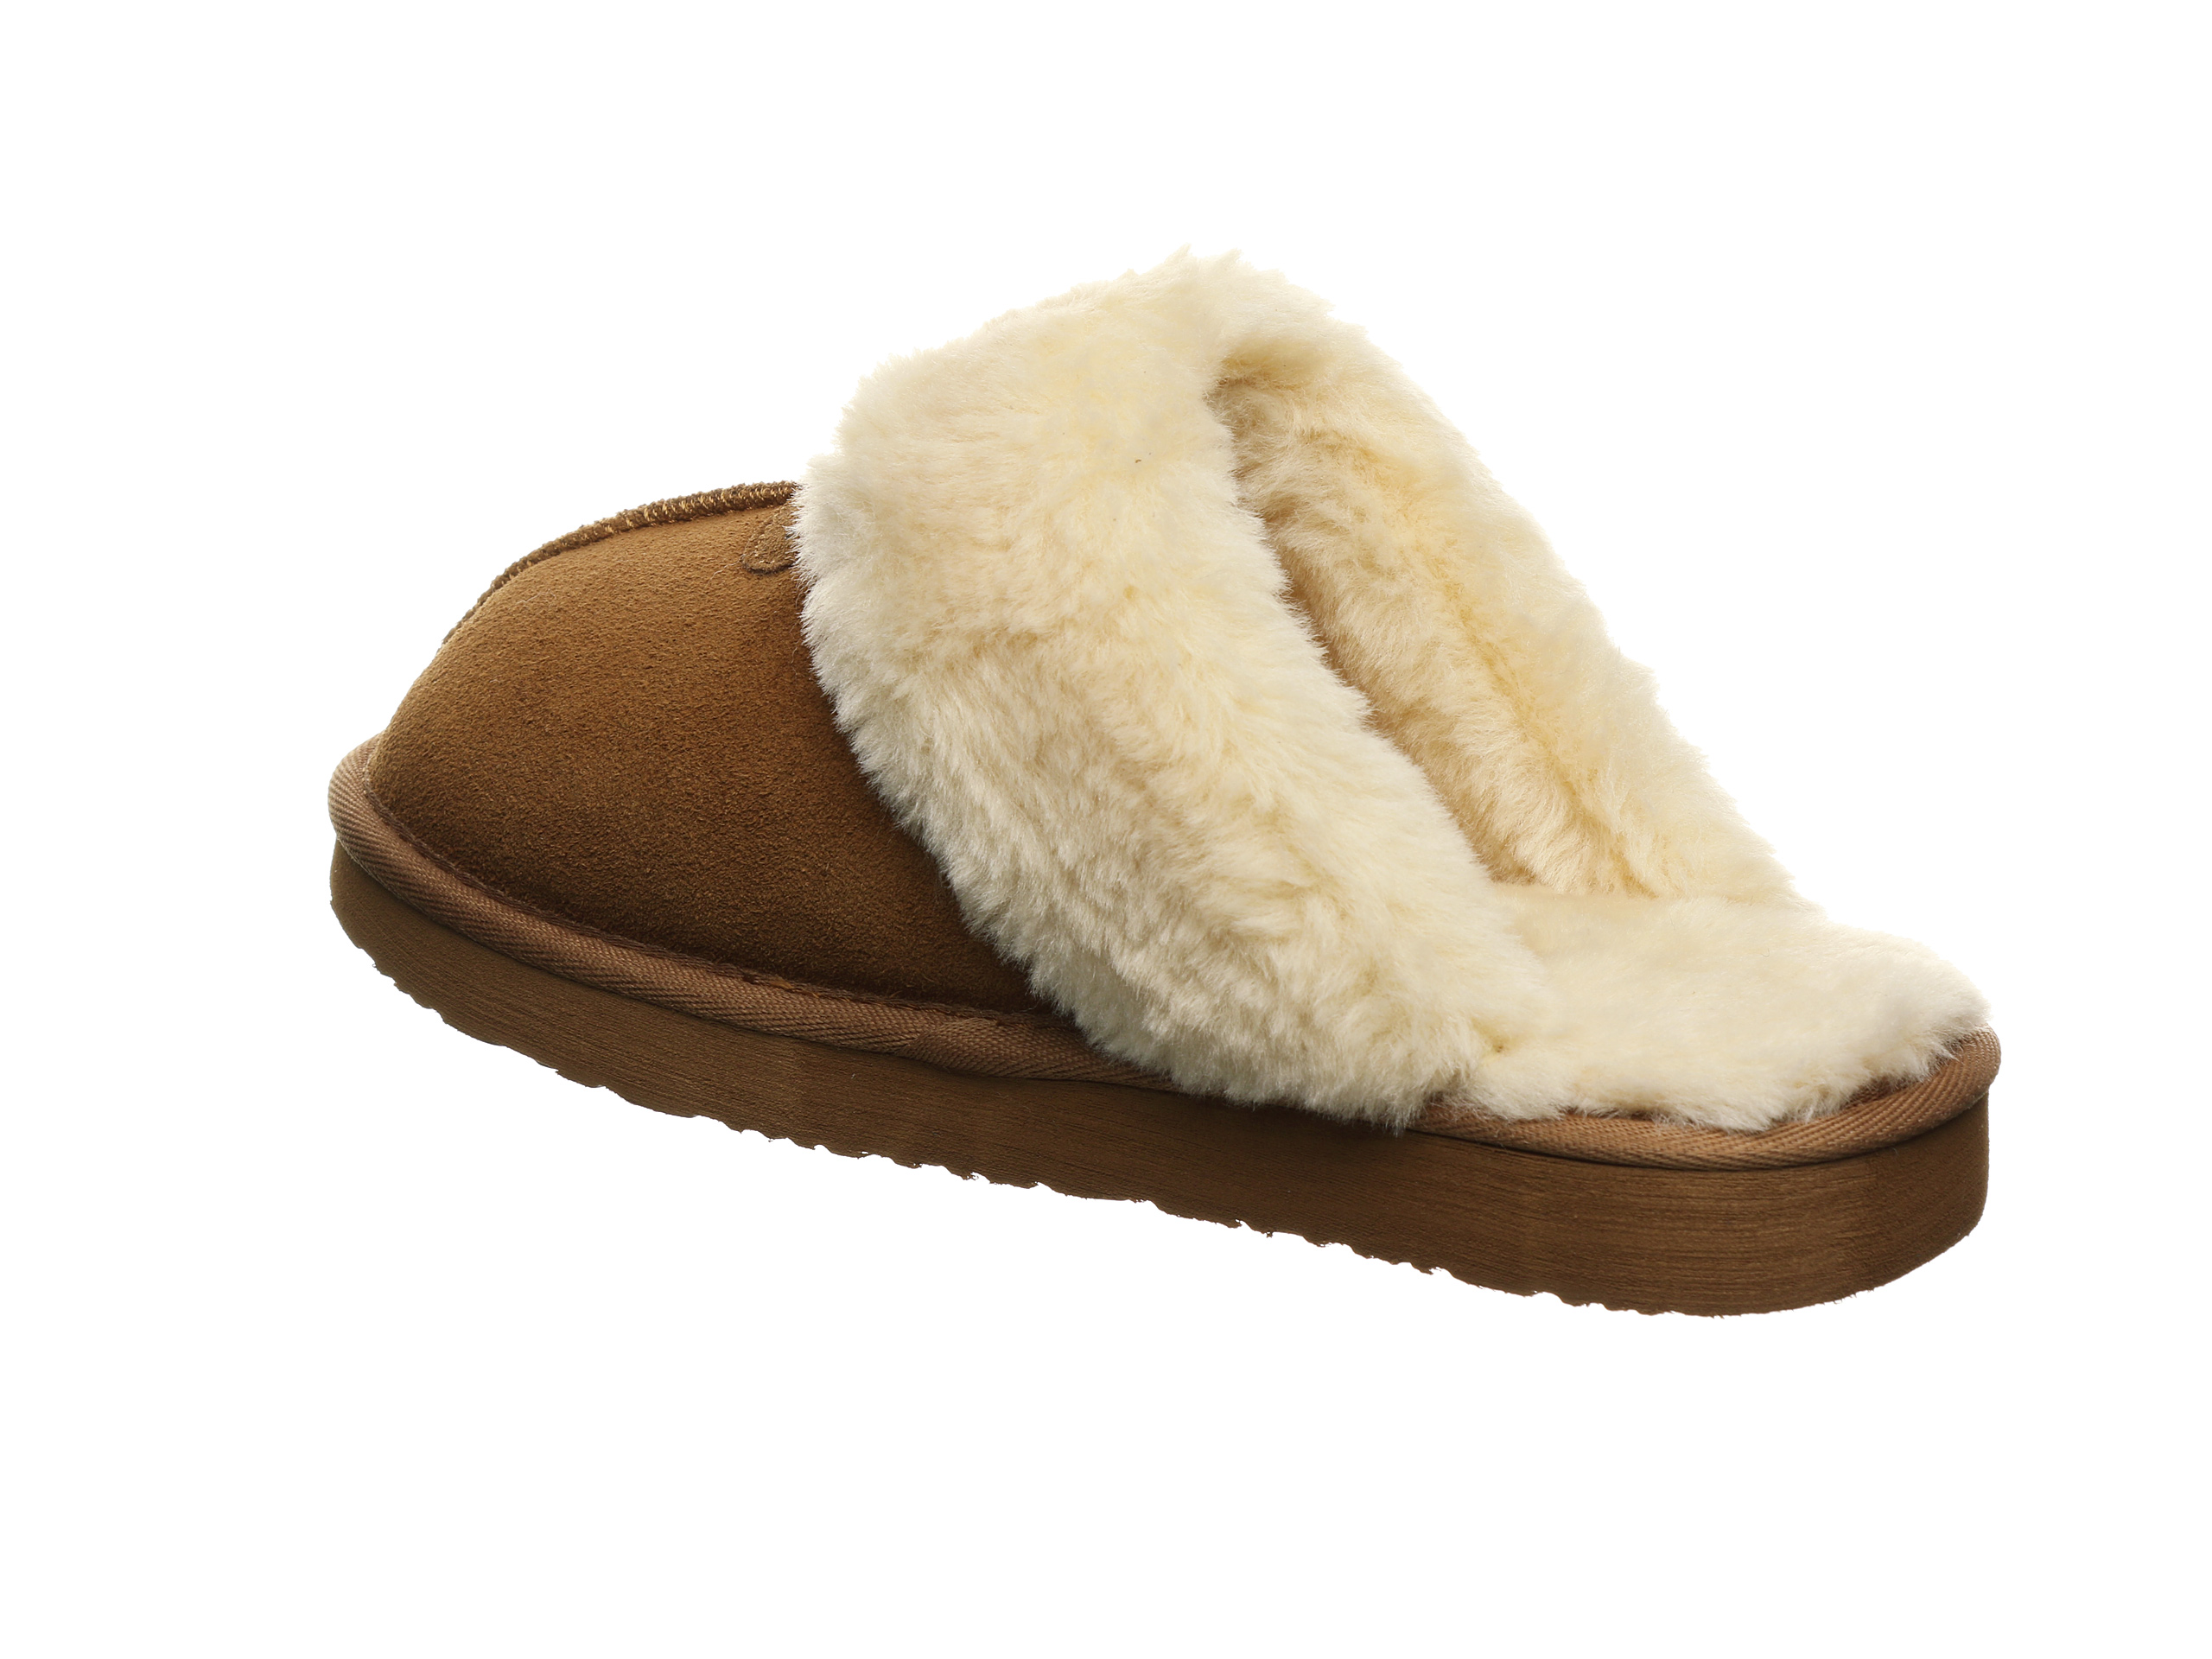 Pawz by Bearpaw Meredith Faux Fur Lined Suede Scuff Slipper (Women's) - image 2 of 15